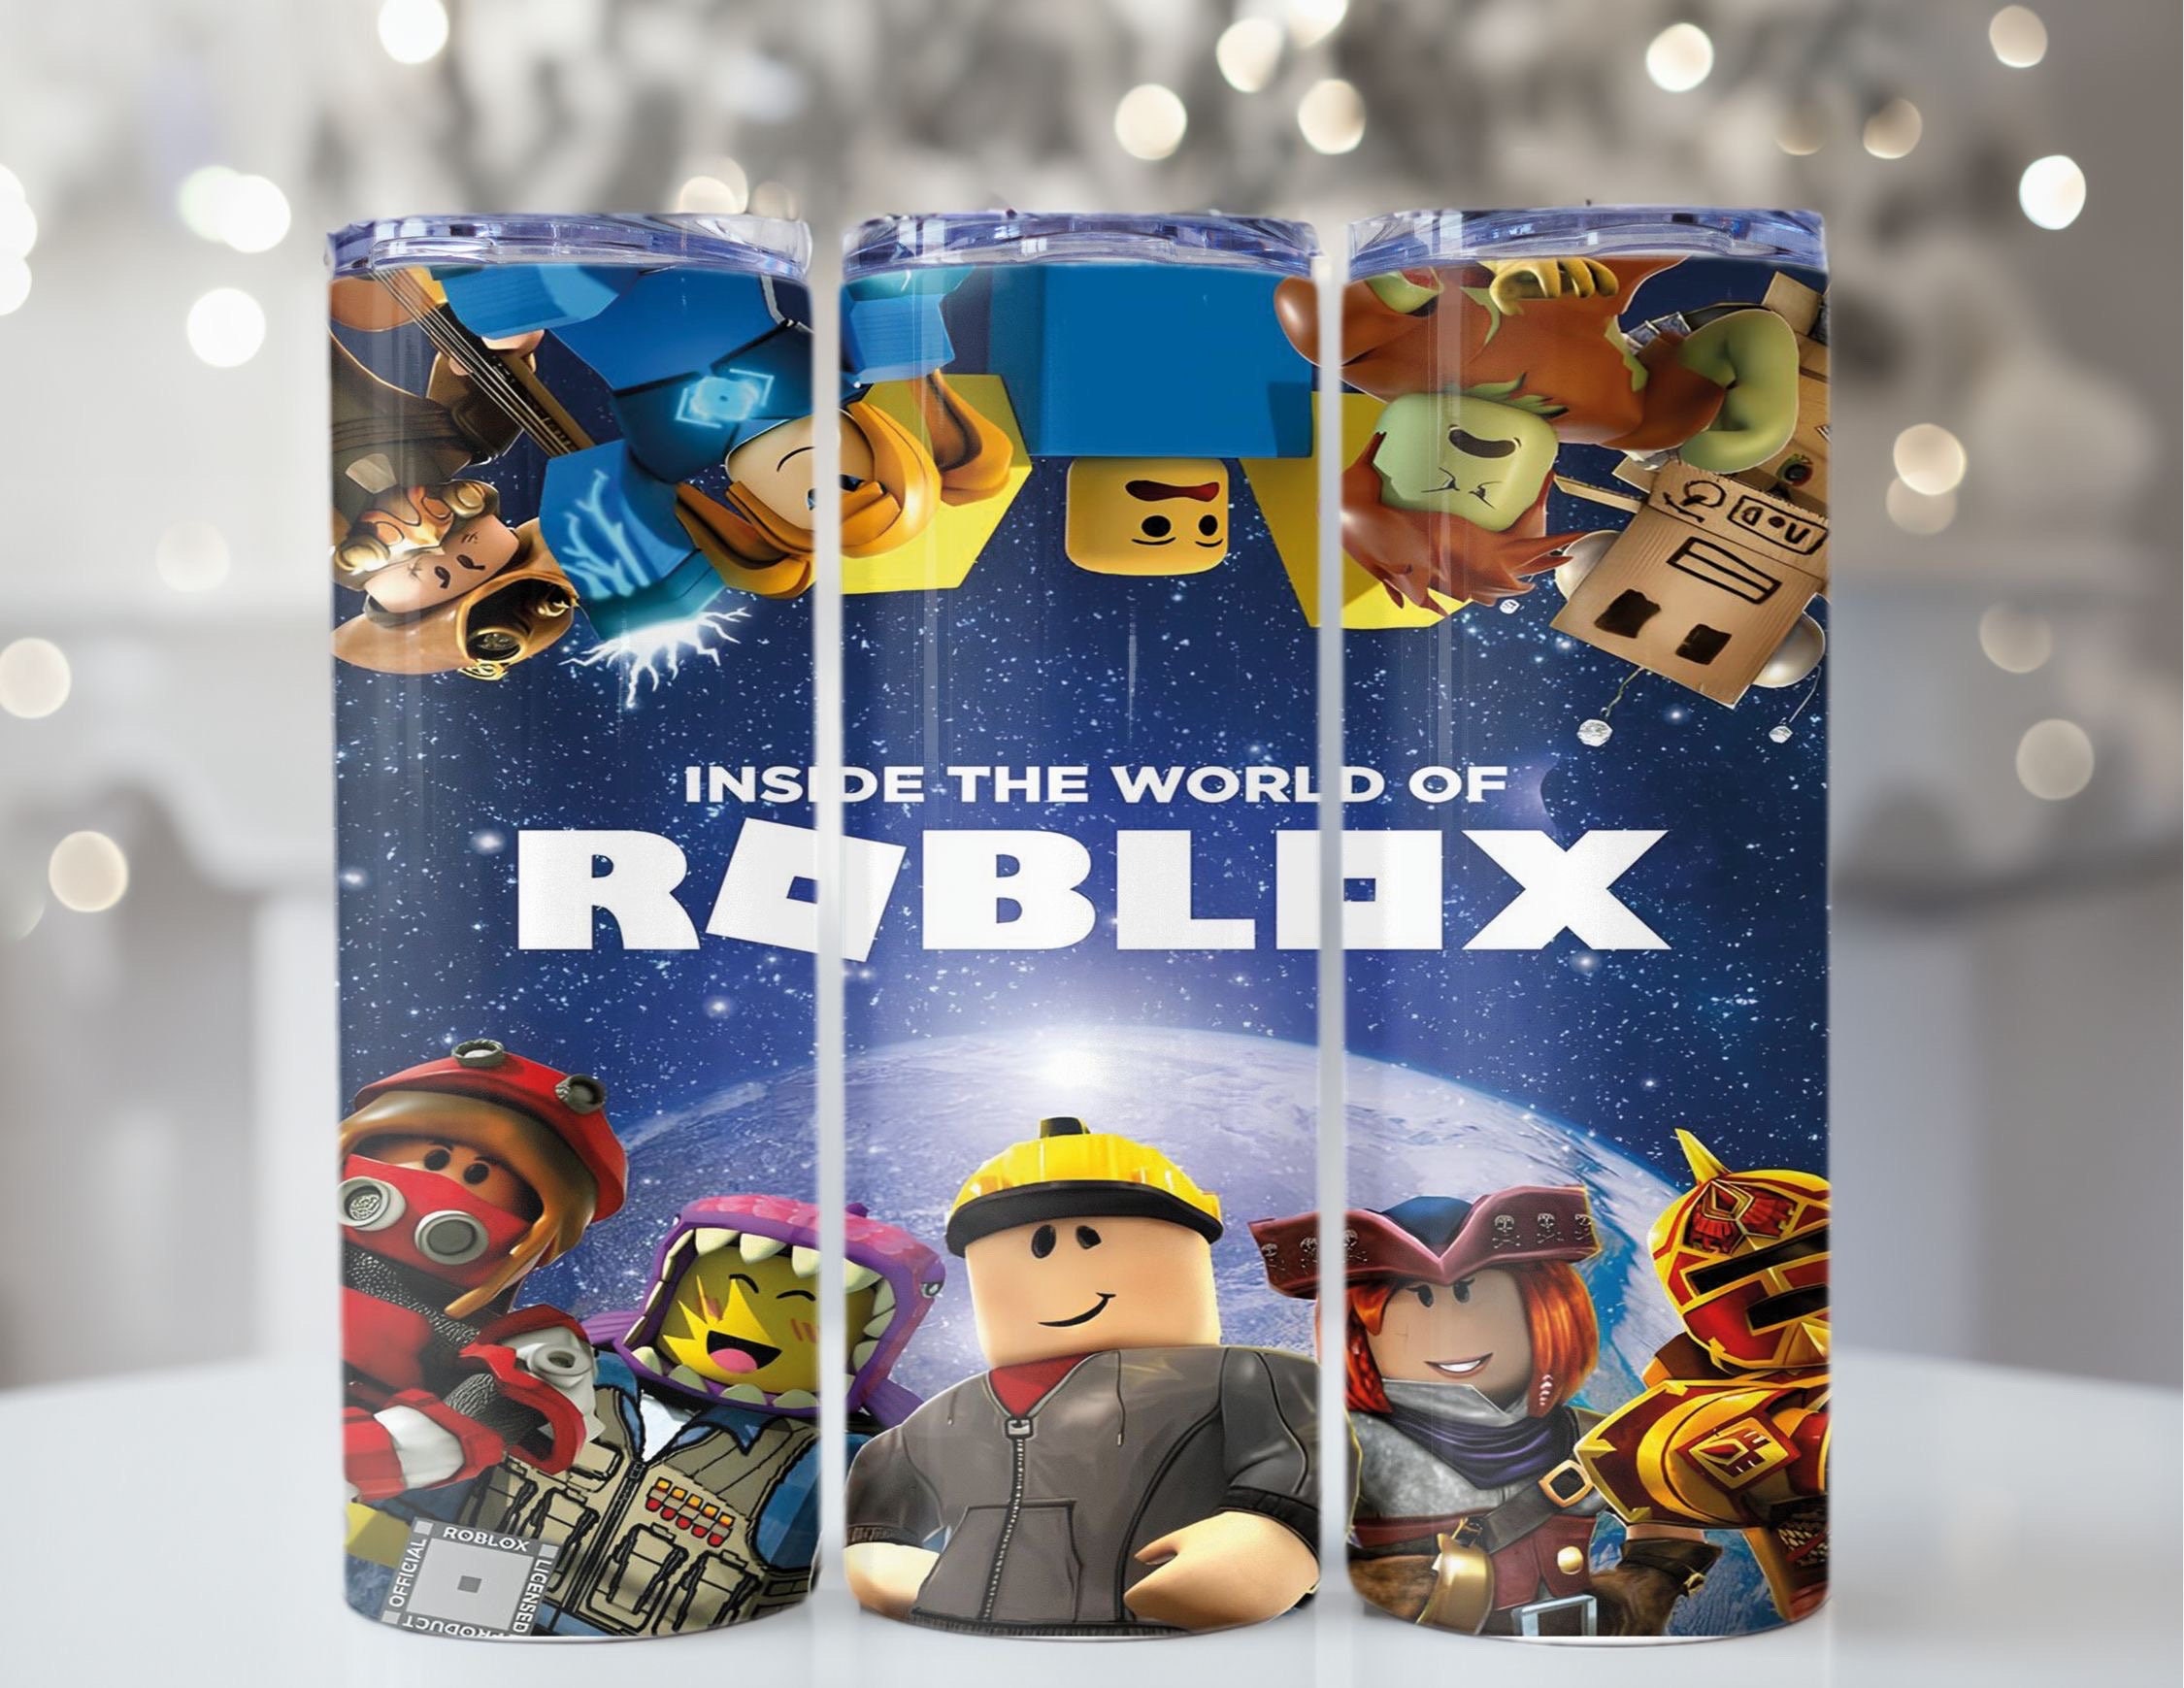 GIVING FREE ROBLOX ACC LEVEL 1 PLS LVL IT UP TO MAX AND GET IT CDK AND v2  observation : r/bloxfruits